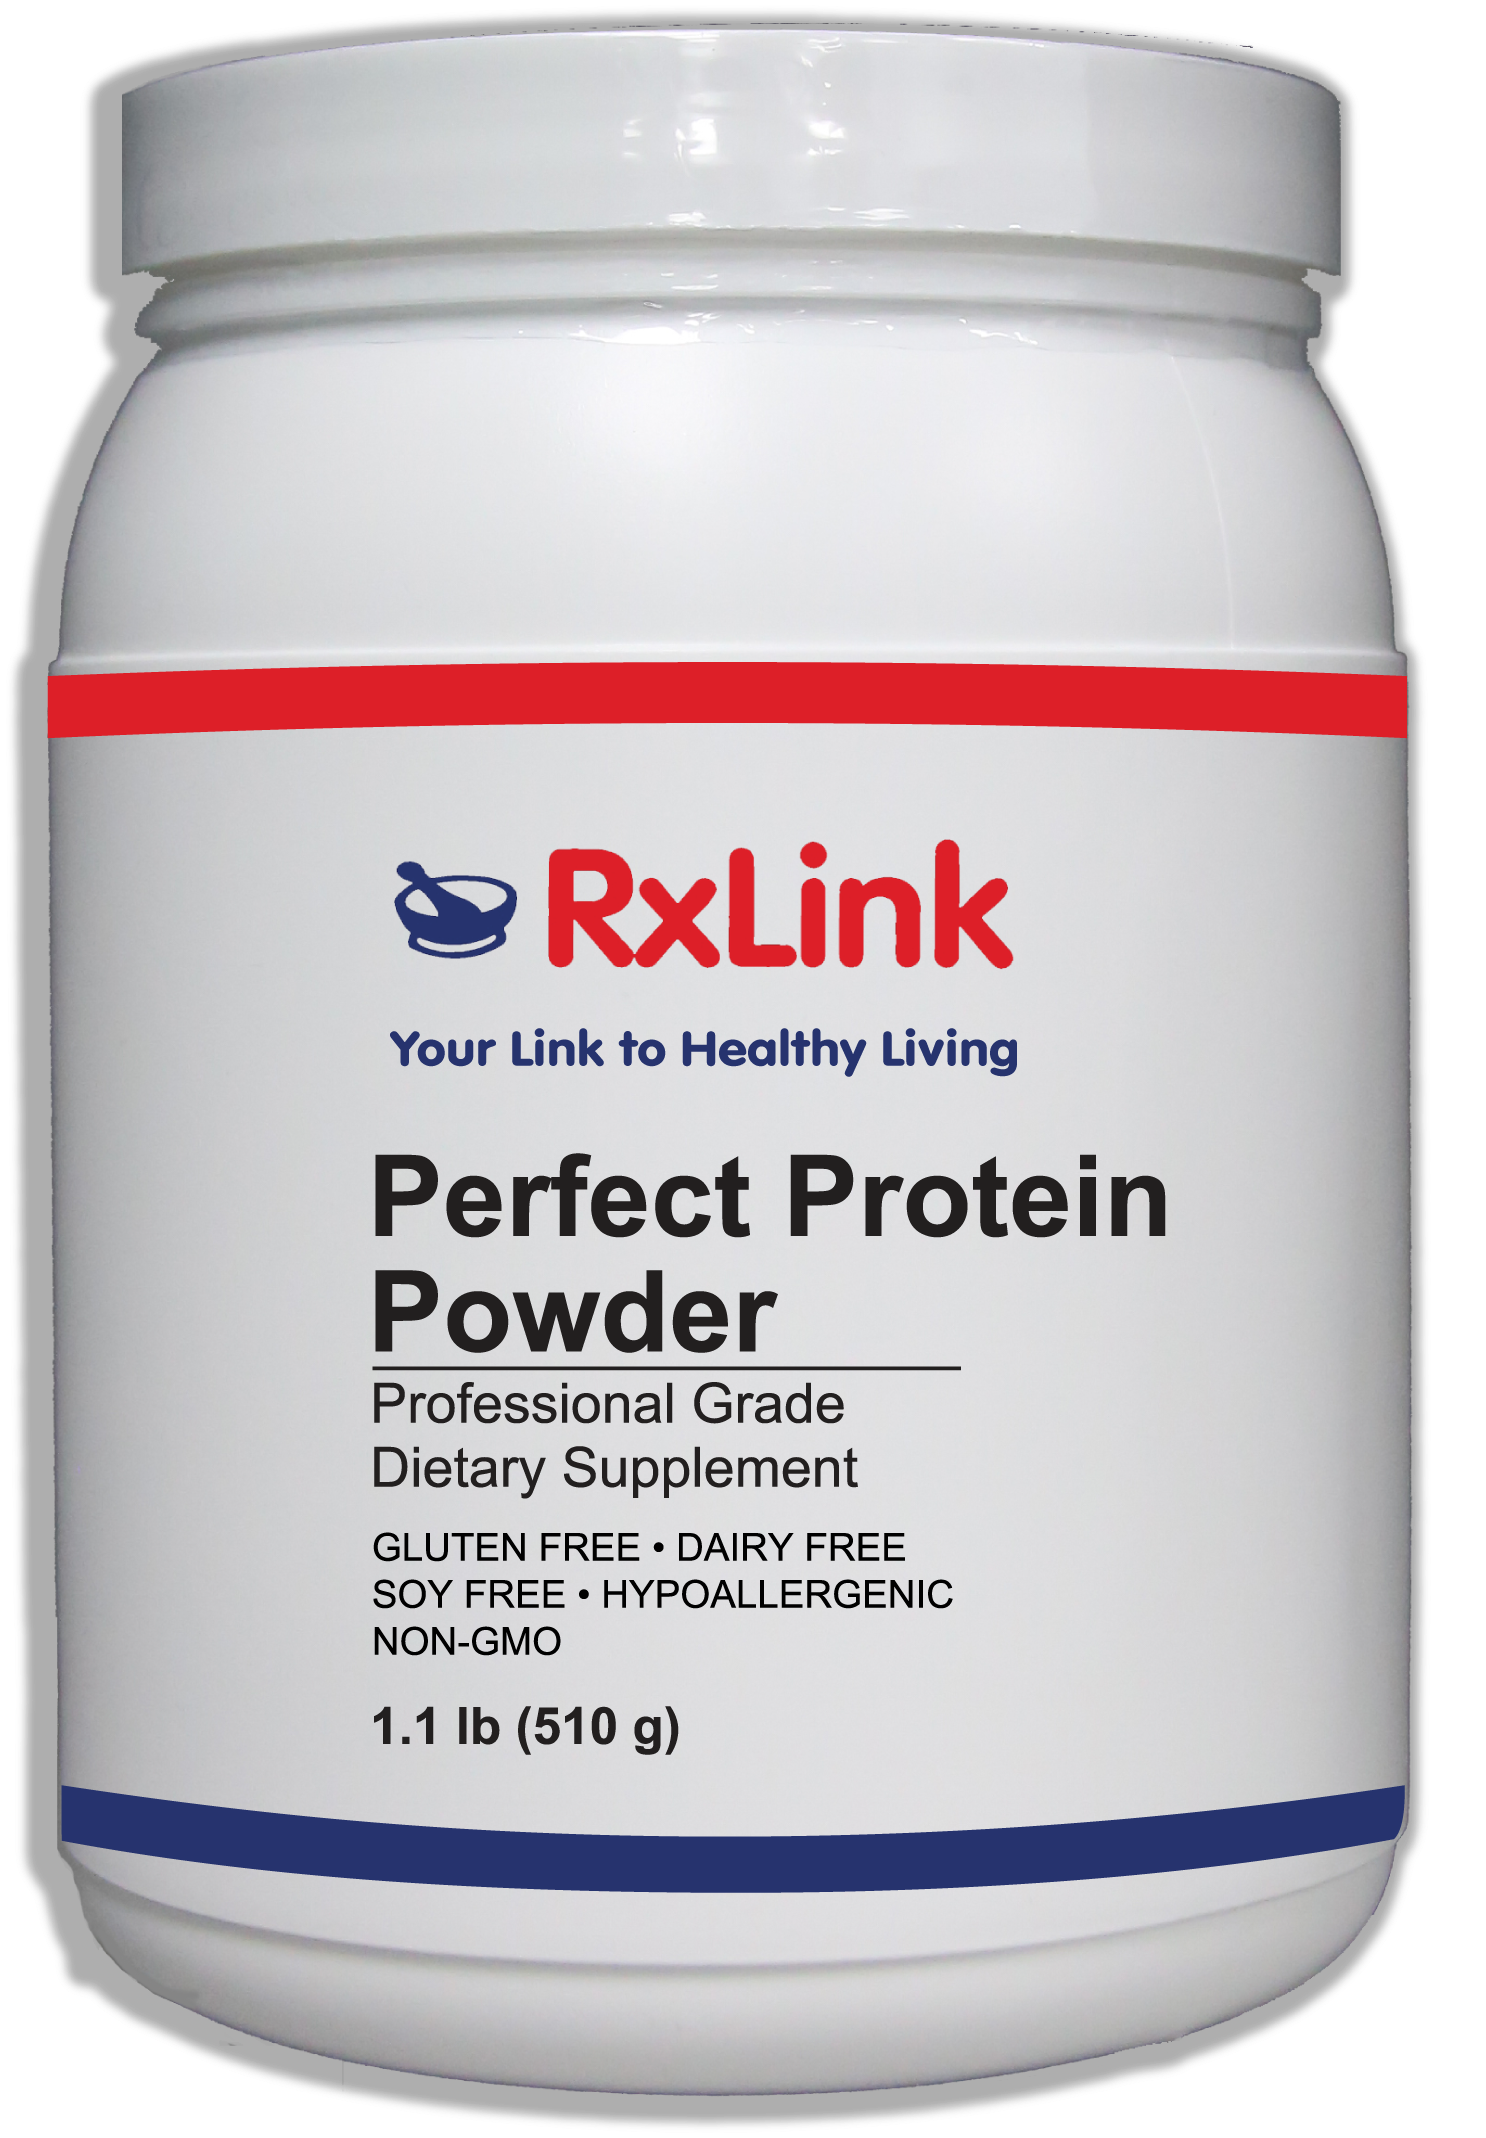 Rx Link Perfect Protein Powder Container